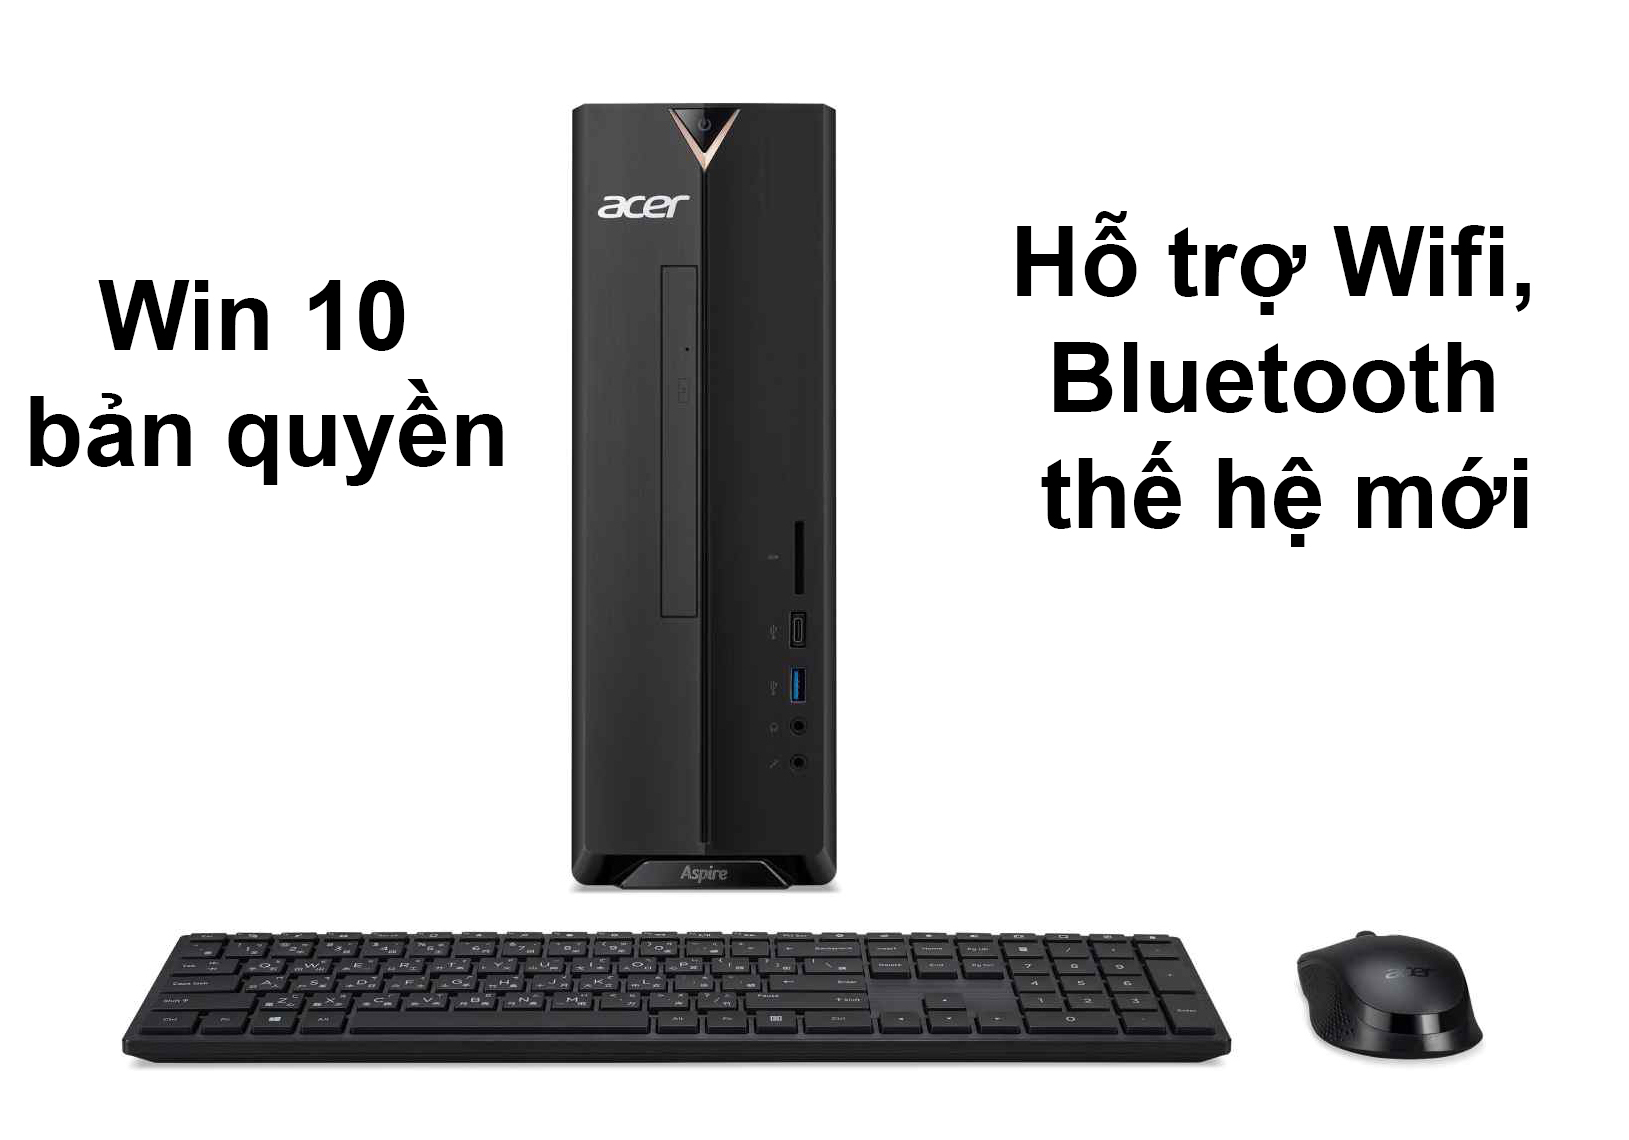 PC Acer AS XC-895 | Win 10 bảng quyền | Wifi Bluetooth